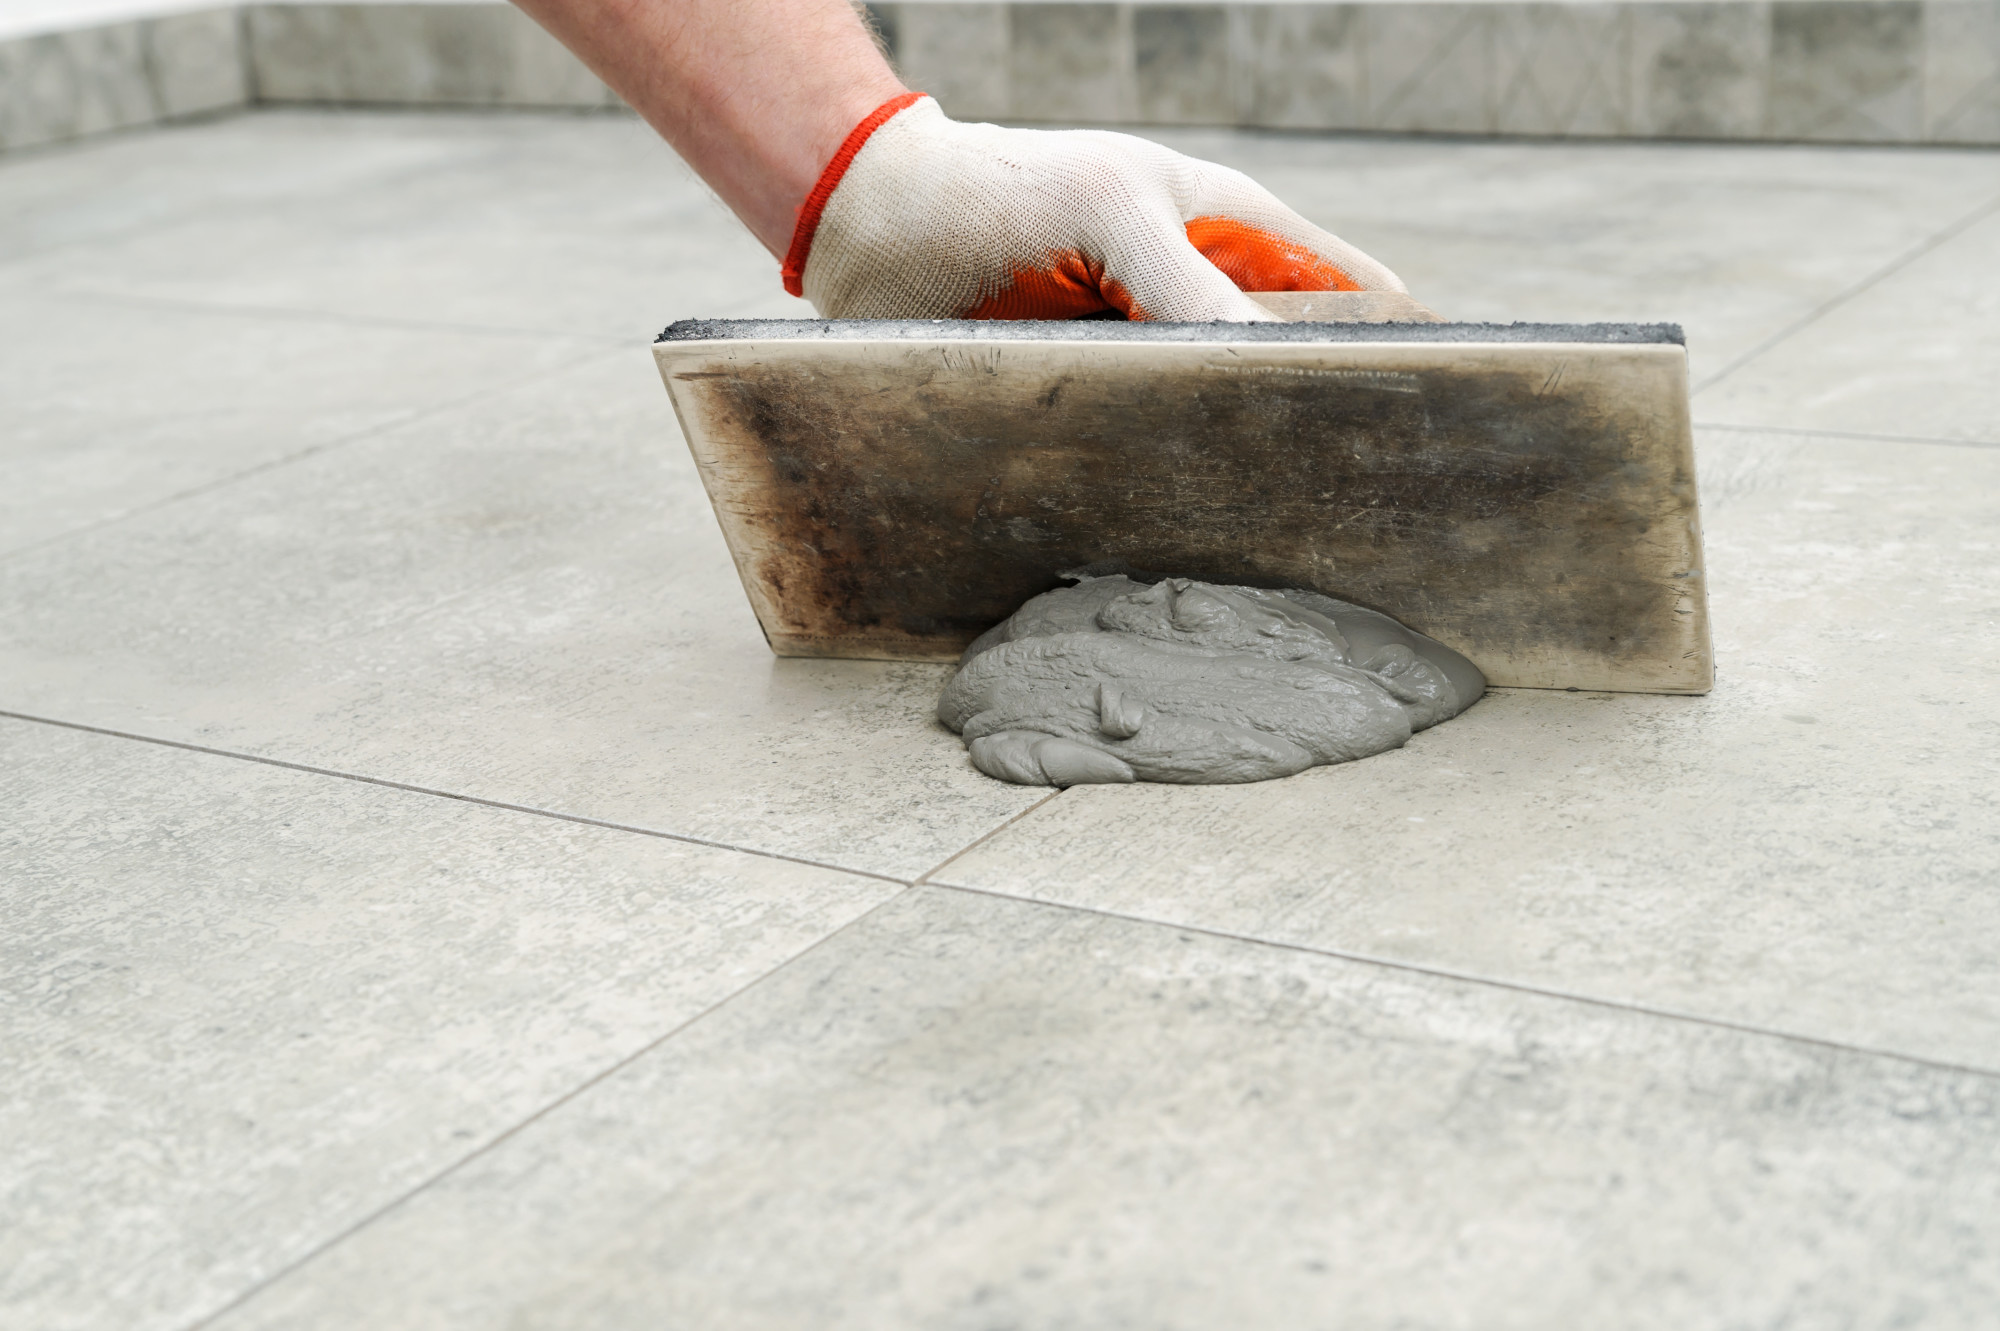 How To Grout Floor Tile The Only Guide, How To Grout Floor Tile